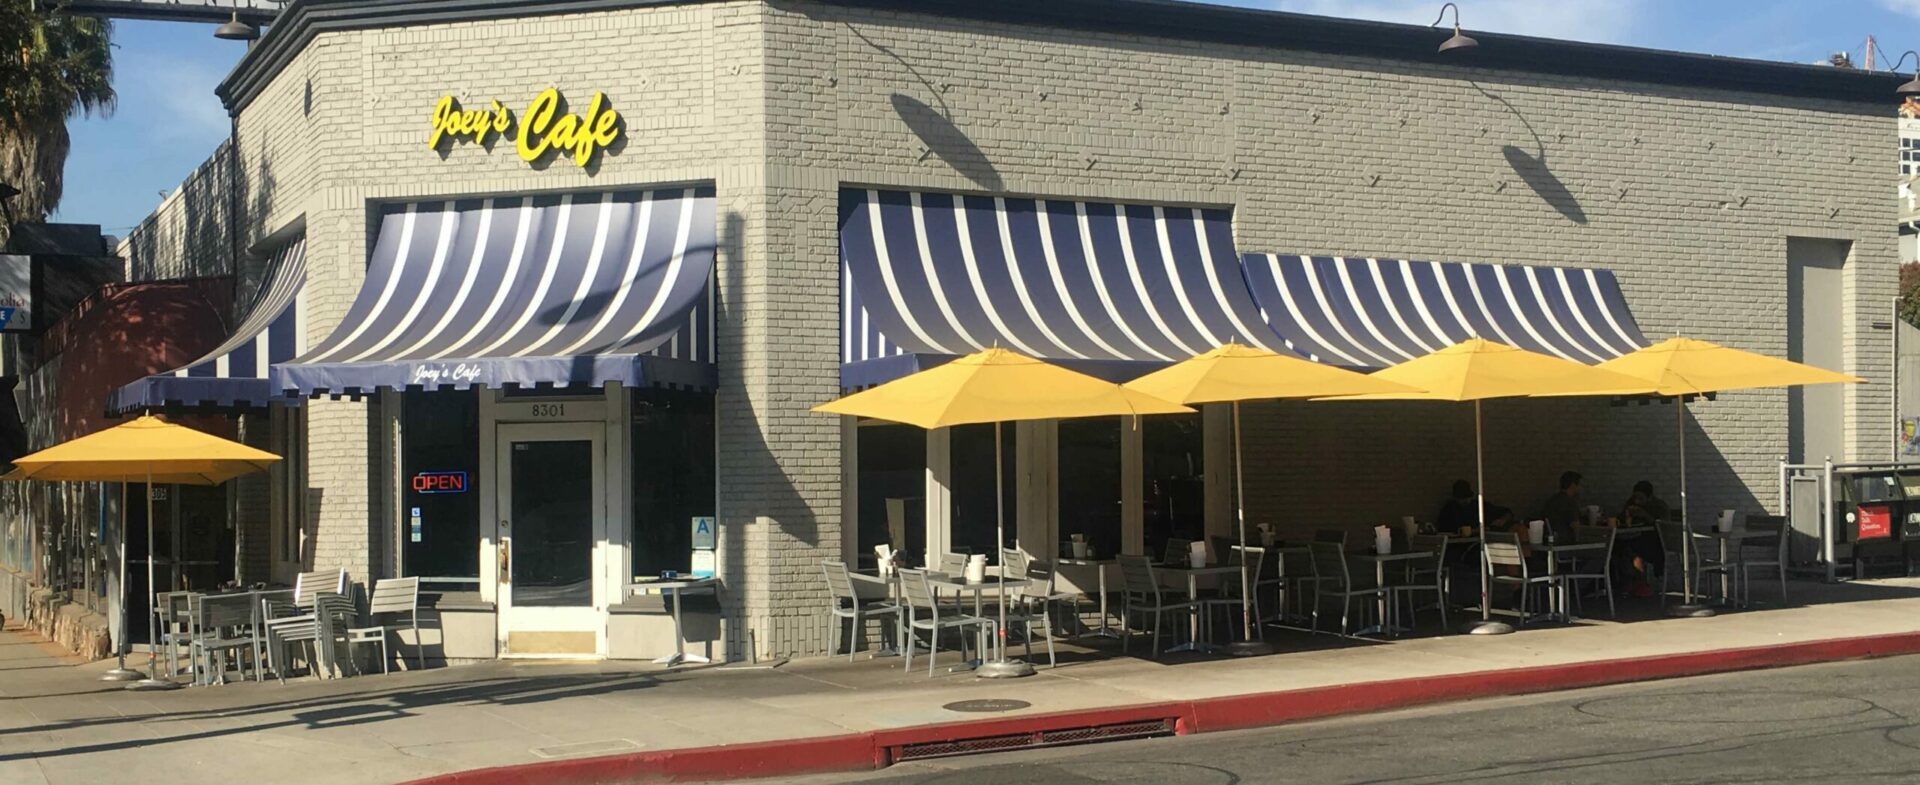 Striped awnings over restaurant patio